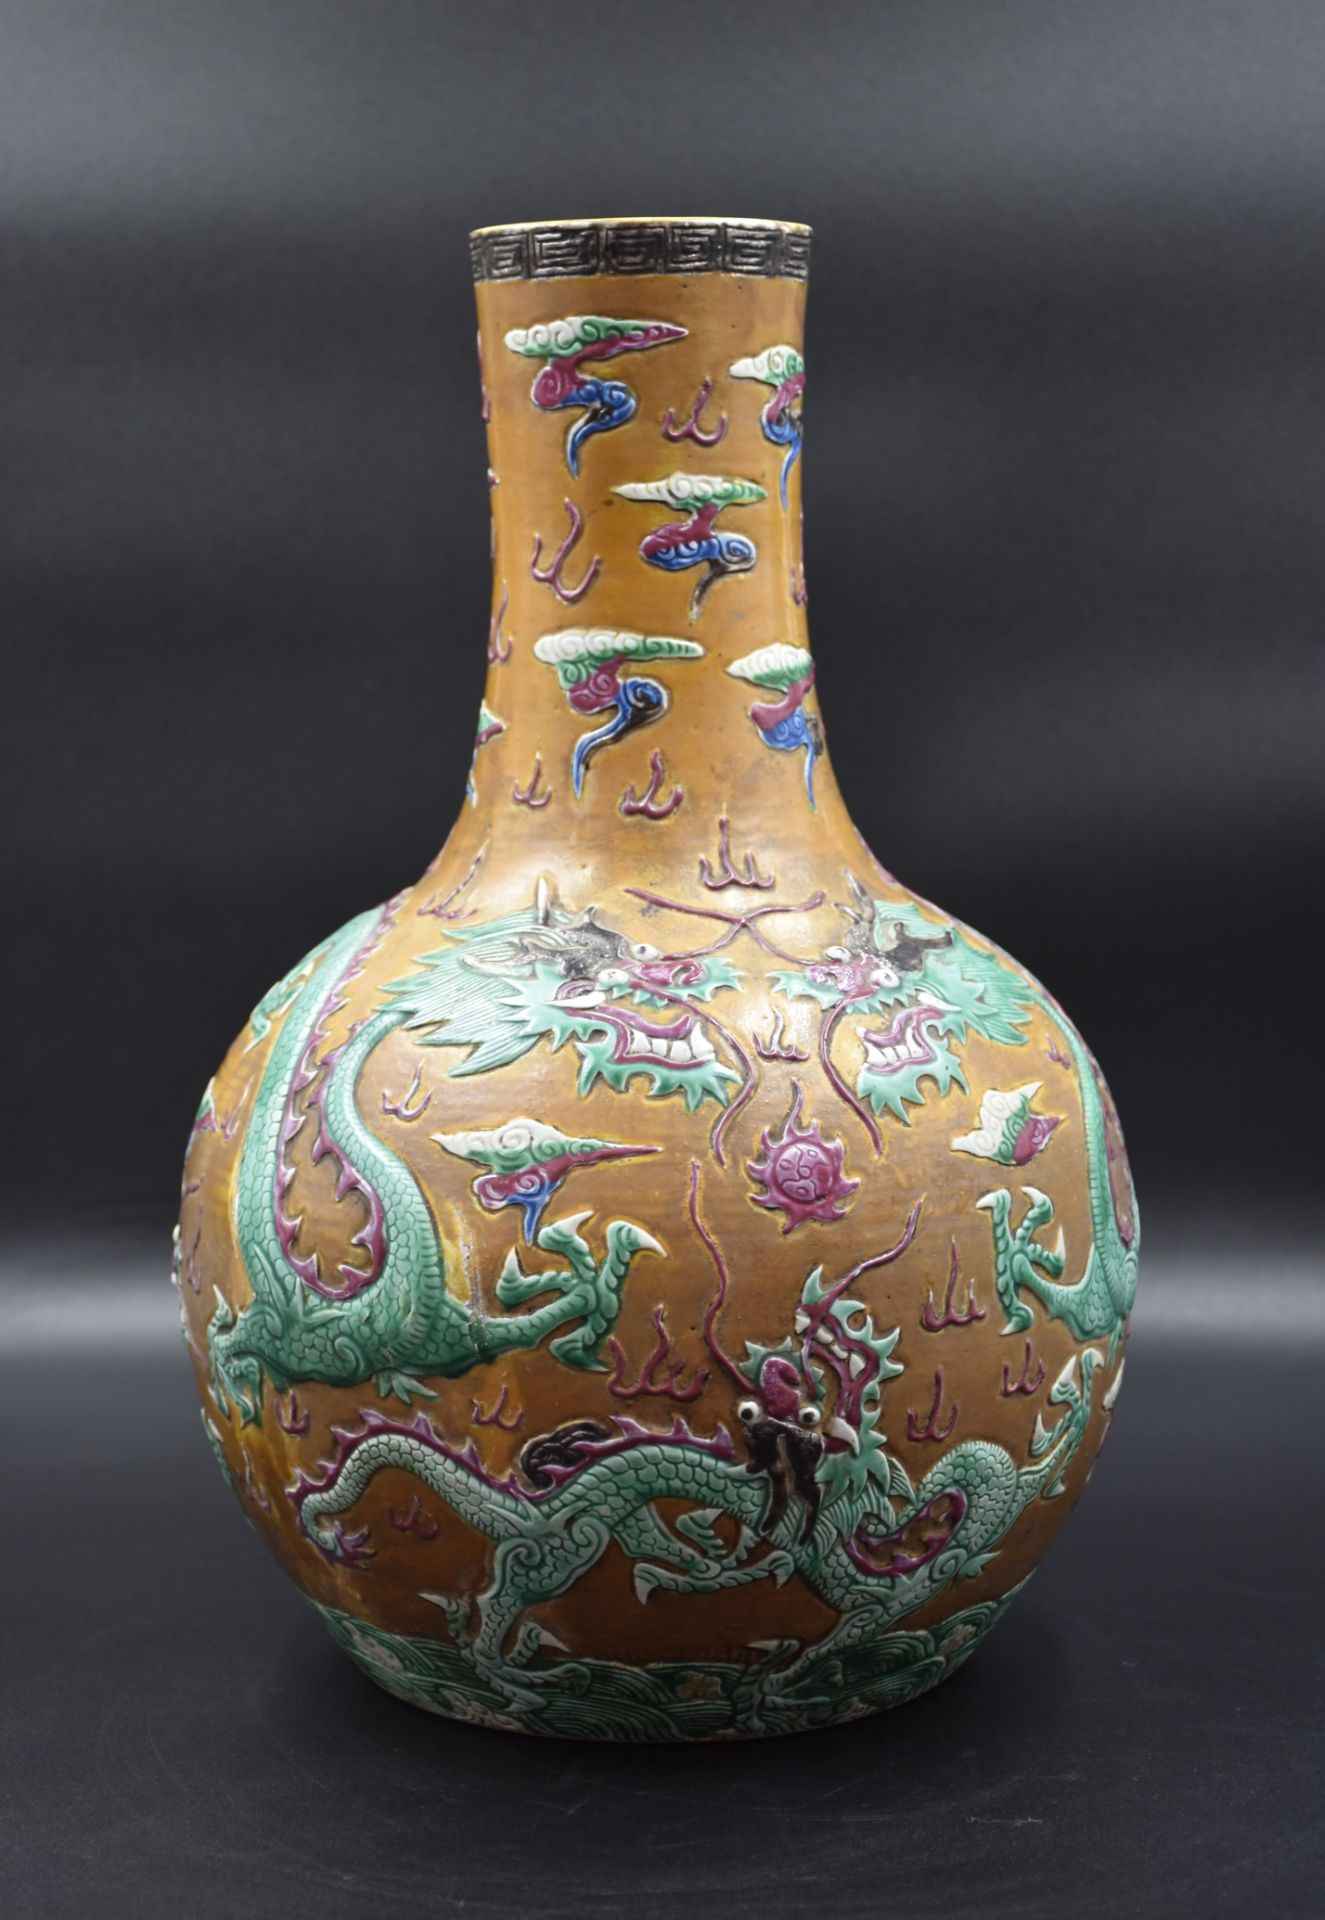 Porcelain vase of China XIX ème century with decoration of dragons in relief. (chip in the neck). He